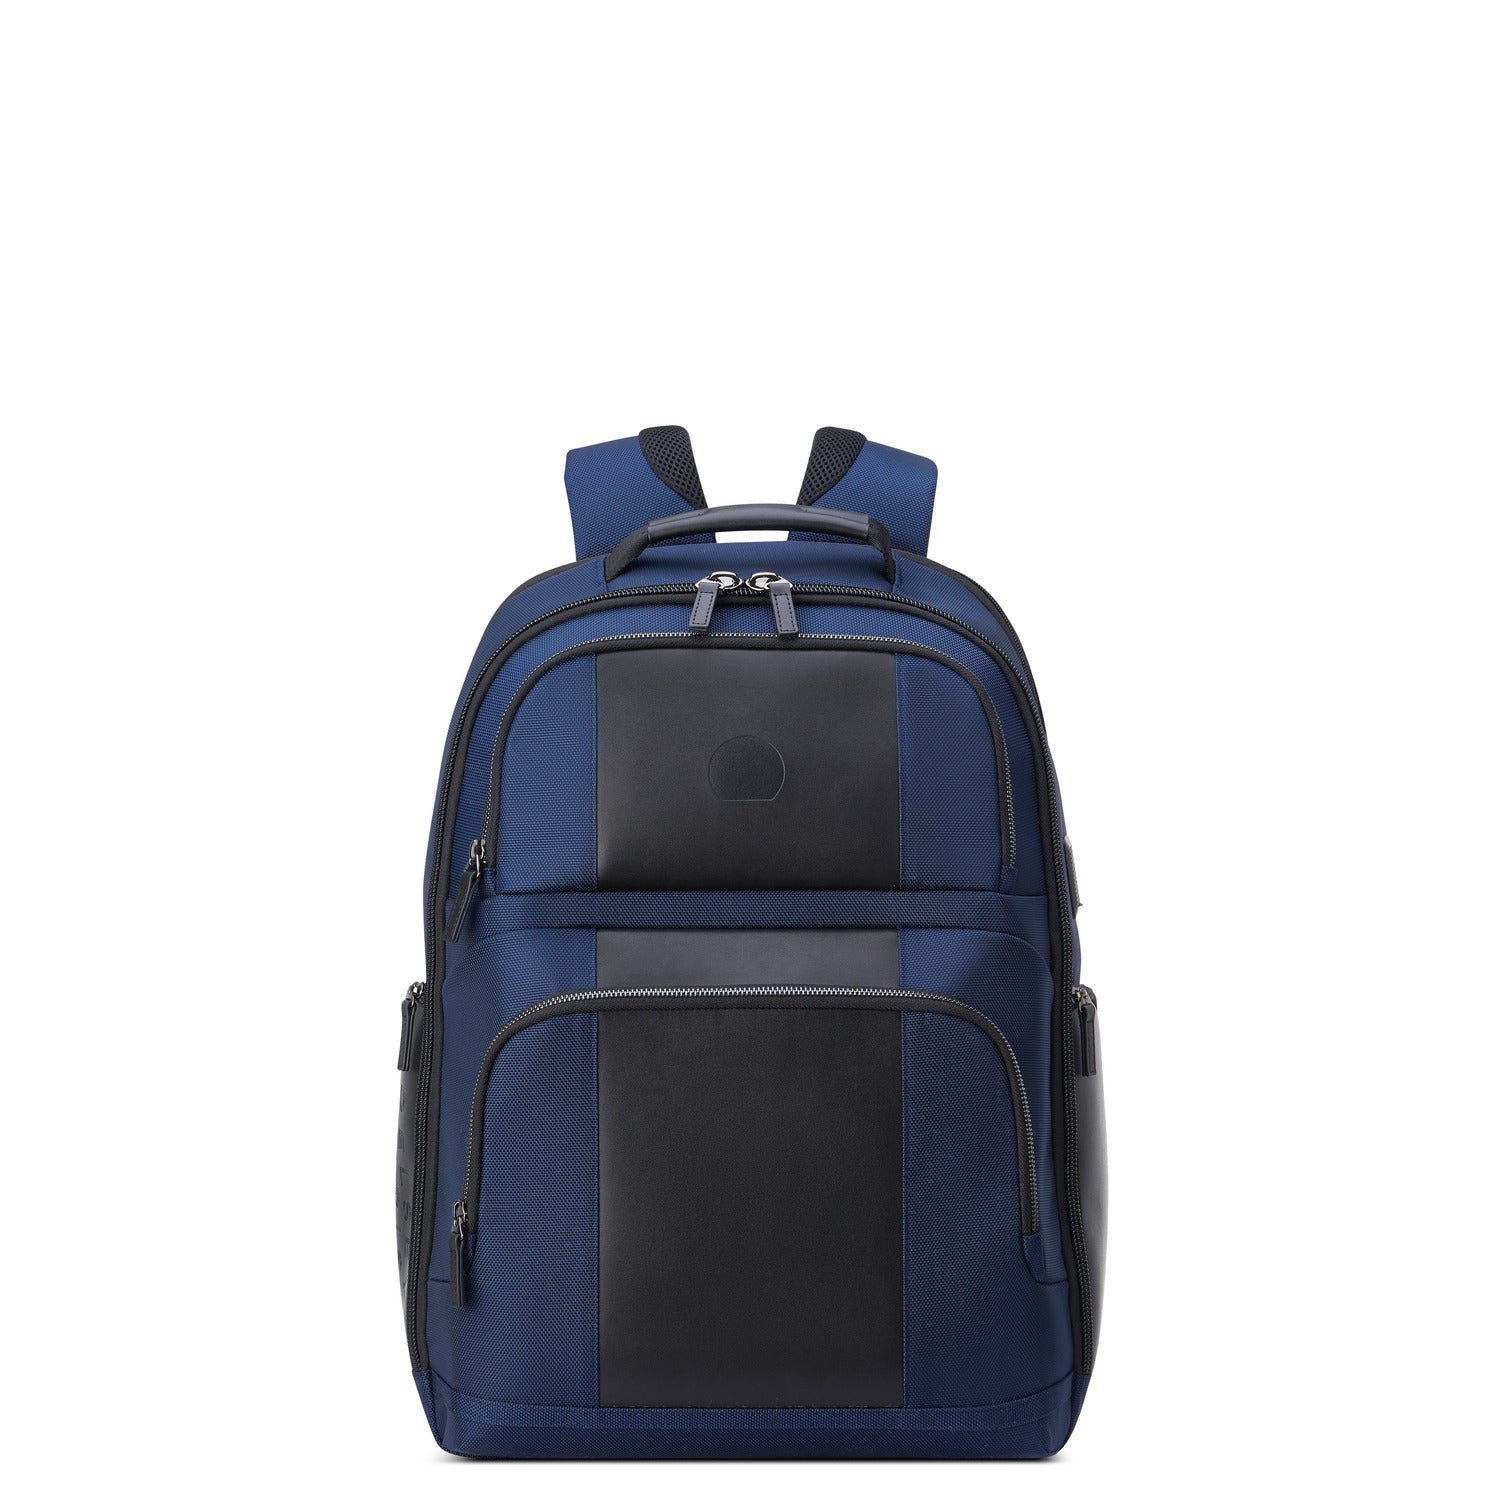 Delsey Wagram Compartment Backpack Laptop  17. 3 inch Navy Blue - 00119962002